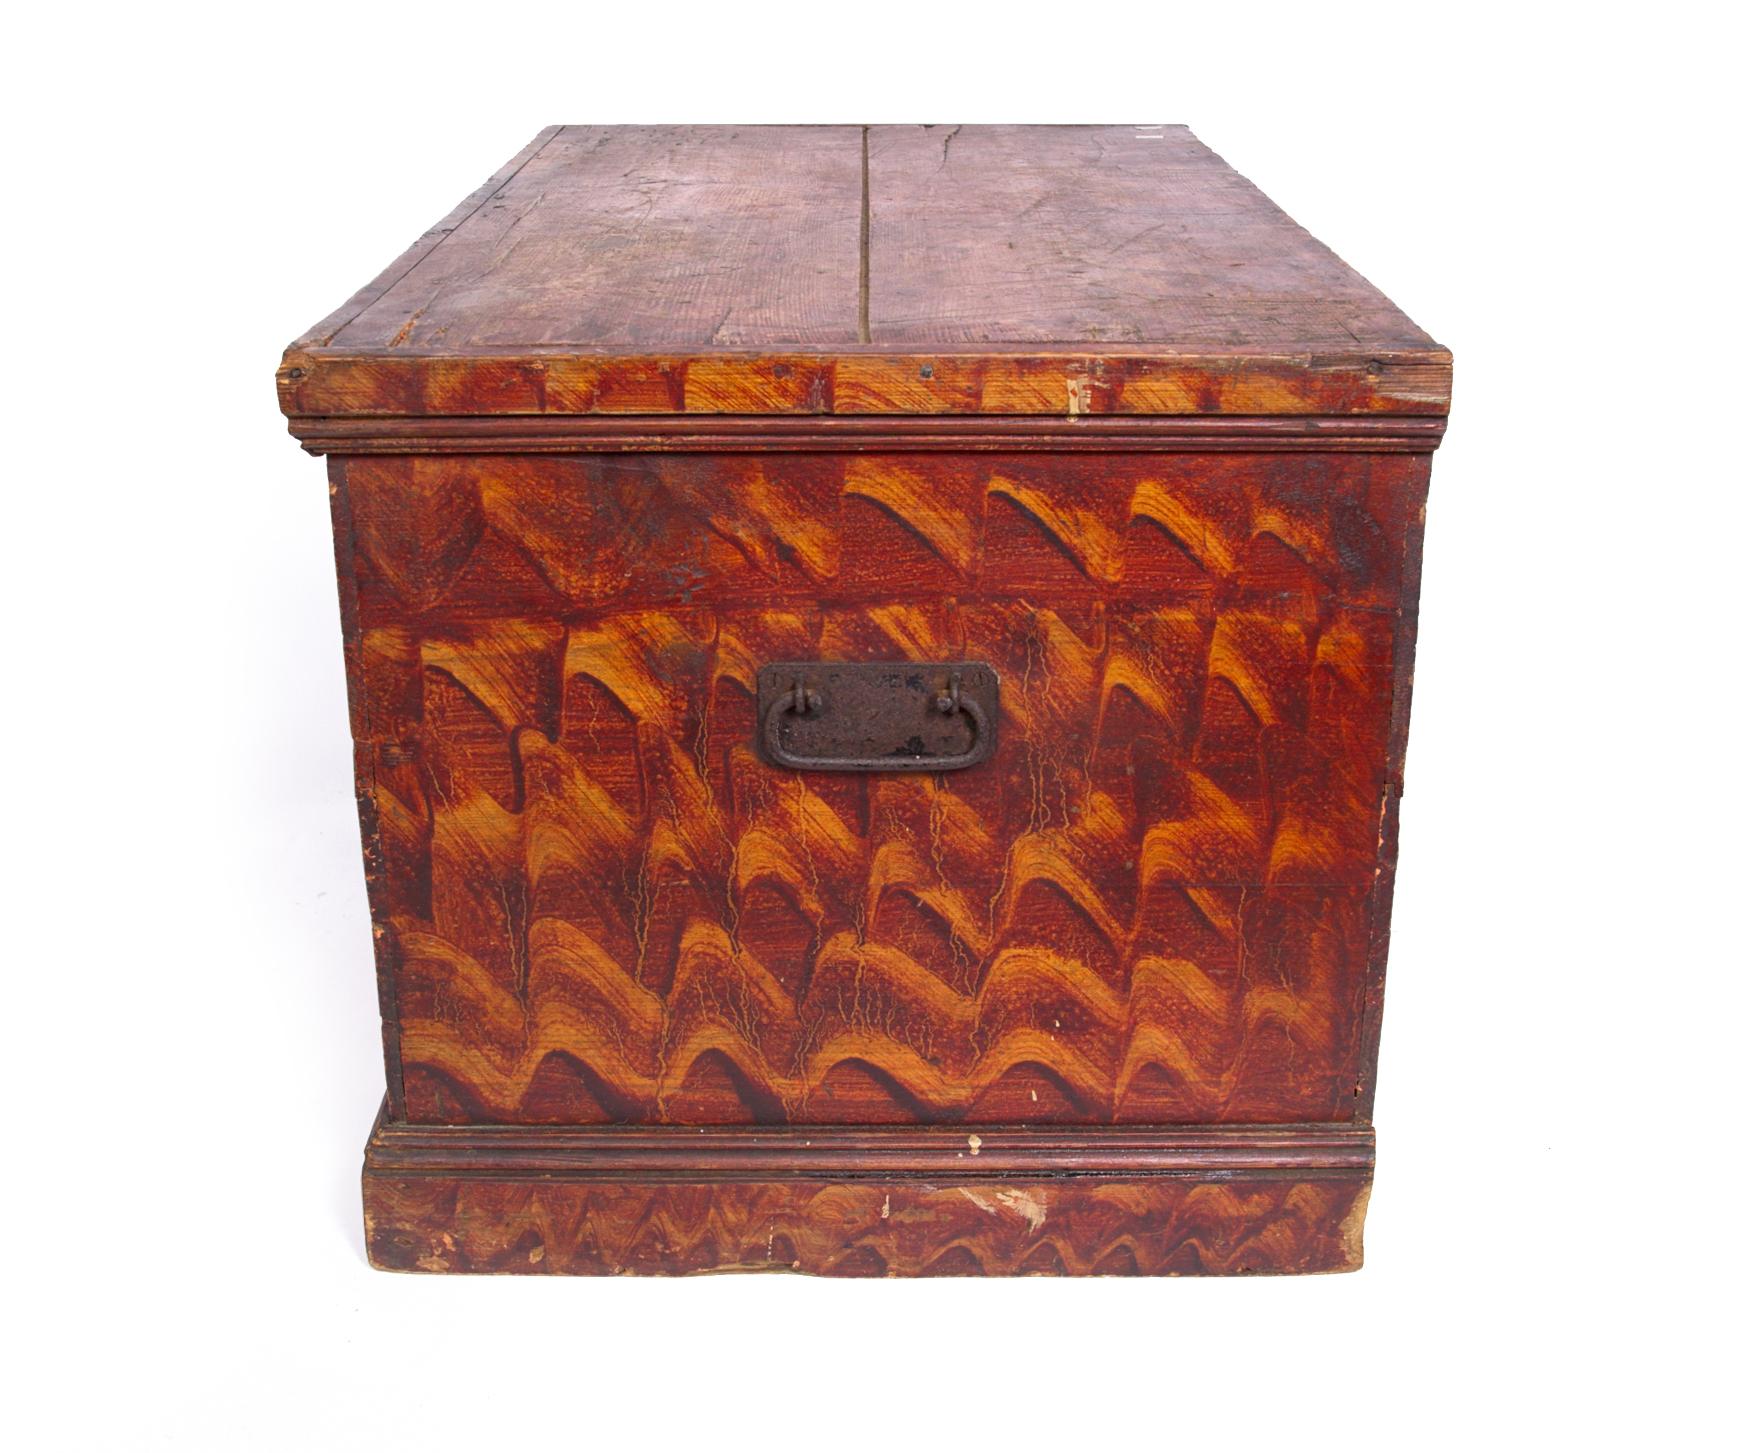 Painted Early 19th Century New England Blanket Chest with Original Faux Grain Paint